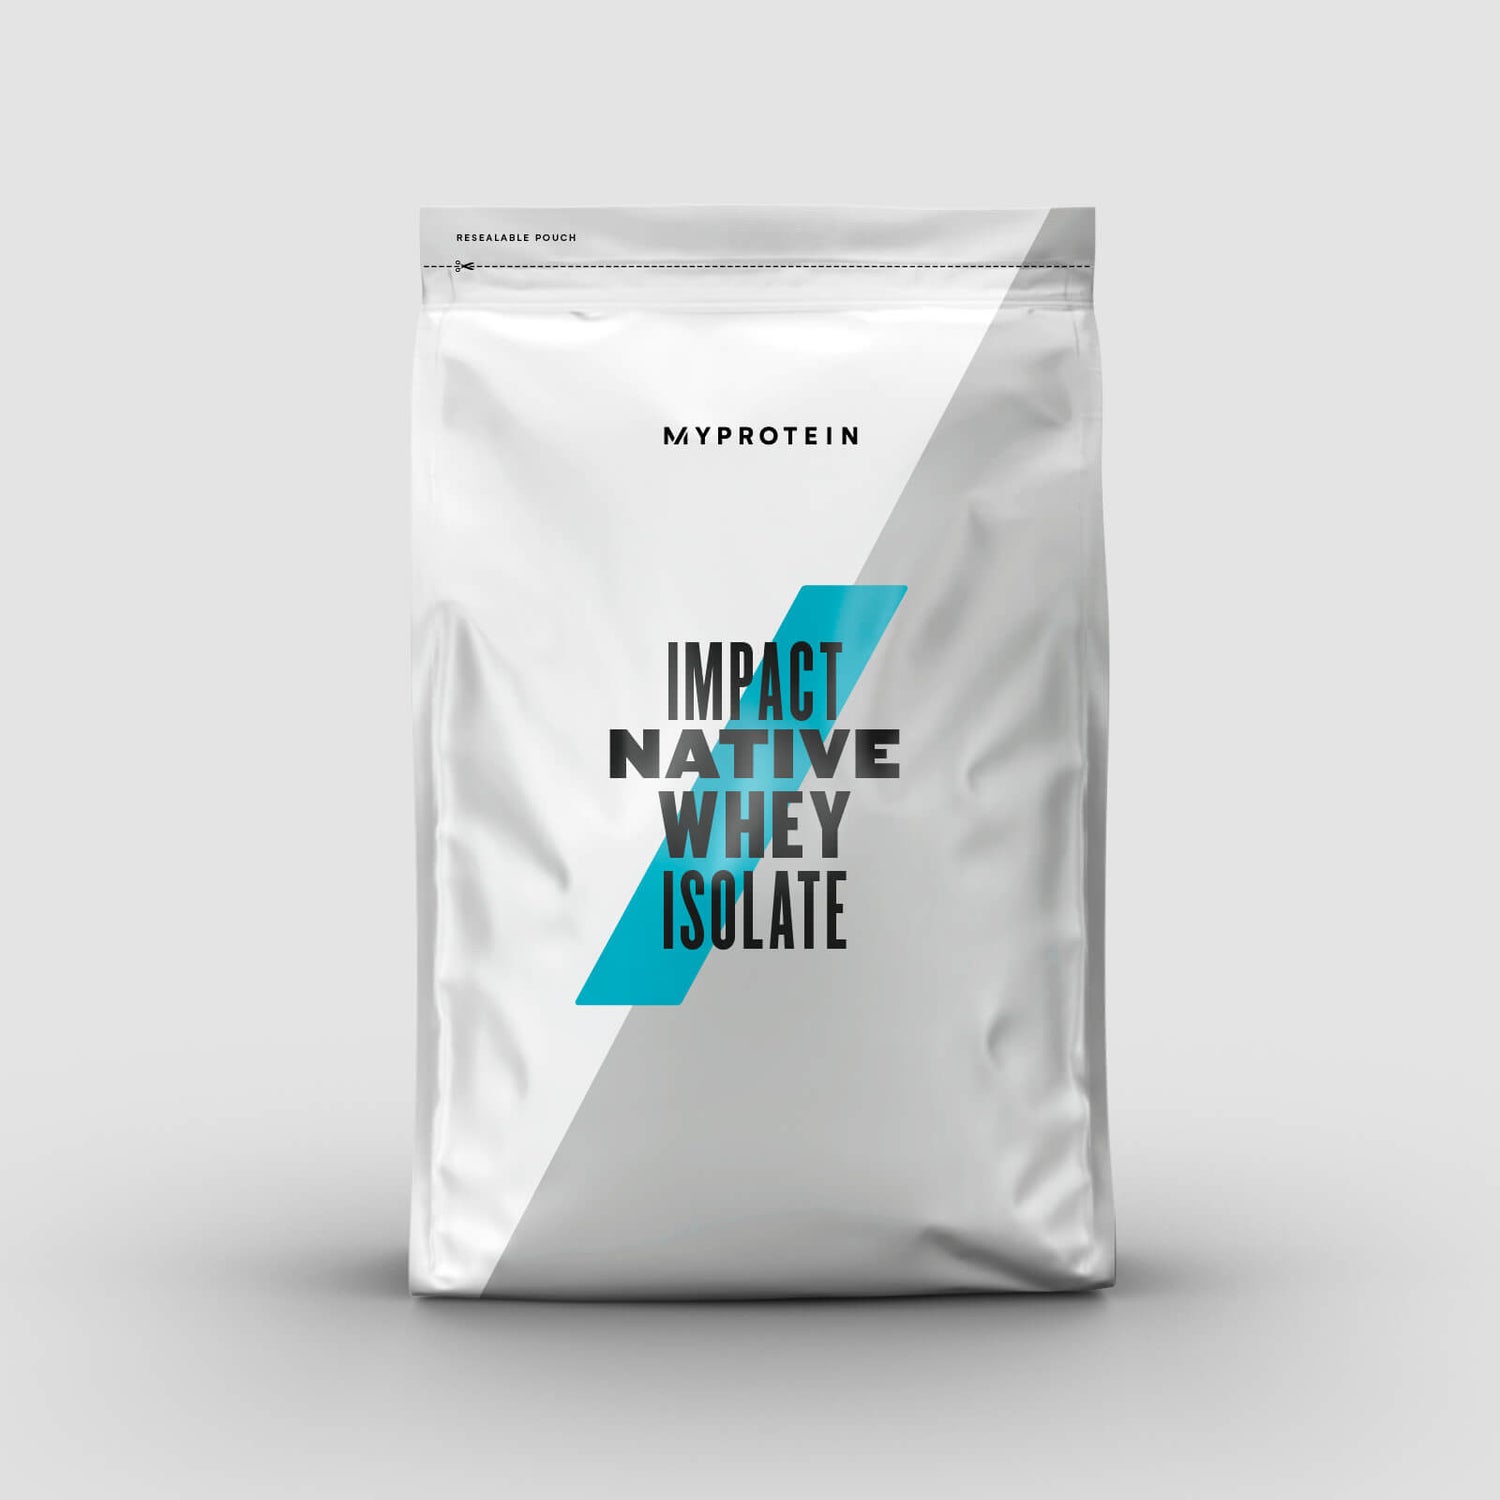 Impact Native Whey Isolate - 1kg - New - Natural Chocolate